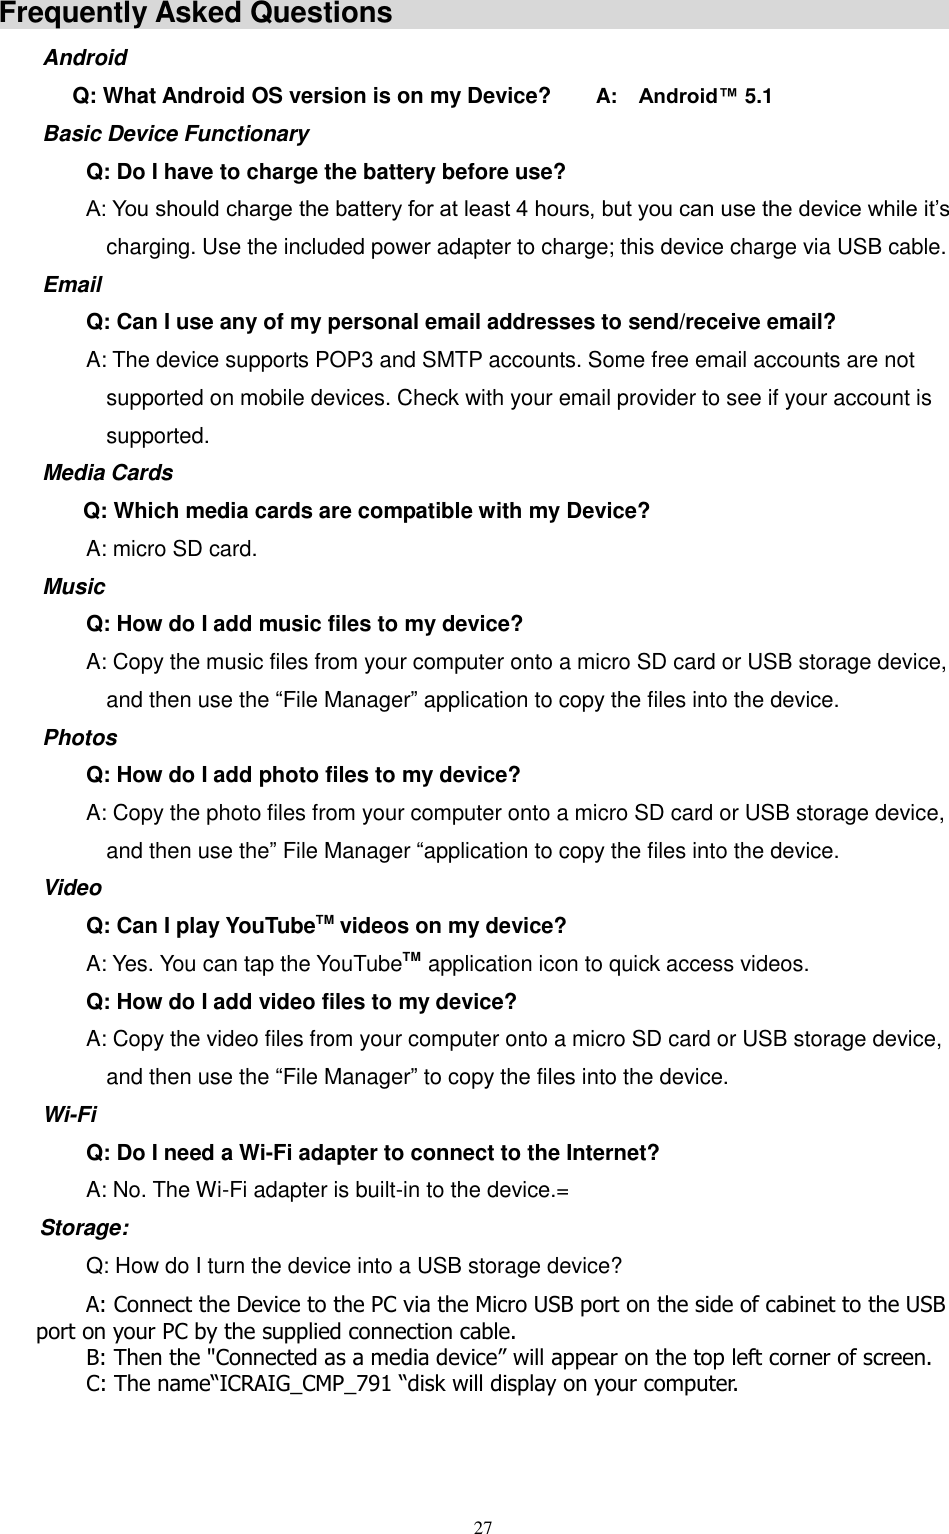  27  Frequently Asked Questions                                                    Android   Q: What Android OS version is on my Device?        A:    Android™ 5.1 Basic Device Functionary Q: Do I have to charge the battery before use? A: You should charge the battery for at least 4 hours, but you can use the device while it’s charging. Use the included power adapter to charge; this device charge via USB cable. Email Q: Can I use any of my personal email addresses to send/receive email? A: The device supports POP3 and SMTP accounts. Some free email accounts are not supported on mobile devices. Check with your email provider to see if your account is supported. Media Cards       Q: Which media cards are compatible with my Device? A: micro SD card. Music Q: How do I add music files to my device? A: Copy the music files from your computer onto a micro SD card or USB storage device, and then use the “File Manager” application to copy the files into the device. Photos Q: How do I add photo files to my device? A: Copy the photo files from your computer onto a micro SD card or USB storage device, and then use the” File Manager “application to copy the files into the device. Video Q: Can I play YouTubeTM videos on my device? A: Yes. You can tap the YouTubeTM application icon to quick access videos. Q: How do I add video files to my device? A: Copy the video files from your computer onto a micro SD card or USB storage device, and then use the “File Manager” to copy the files into the device. Wi-Fi Q: Do I need a Wi-Fi adapter to connect to the Internet? A: No. The Wi-Fi adapter is built-in to the device.= Storage: Q: How do I turn the device into a USB storage device?        A: Connect the Device to the PC via the Micro USB port on the side of cabinet to the USB port on your PC by the supplied connection cable.                 B: Then the &quot;Connected as a media device” will appear on the top left corner of screen.         C: The name“ICRAIG_CMP_791 “disk will display on your computer.   